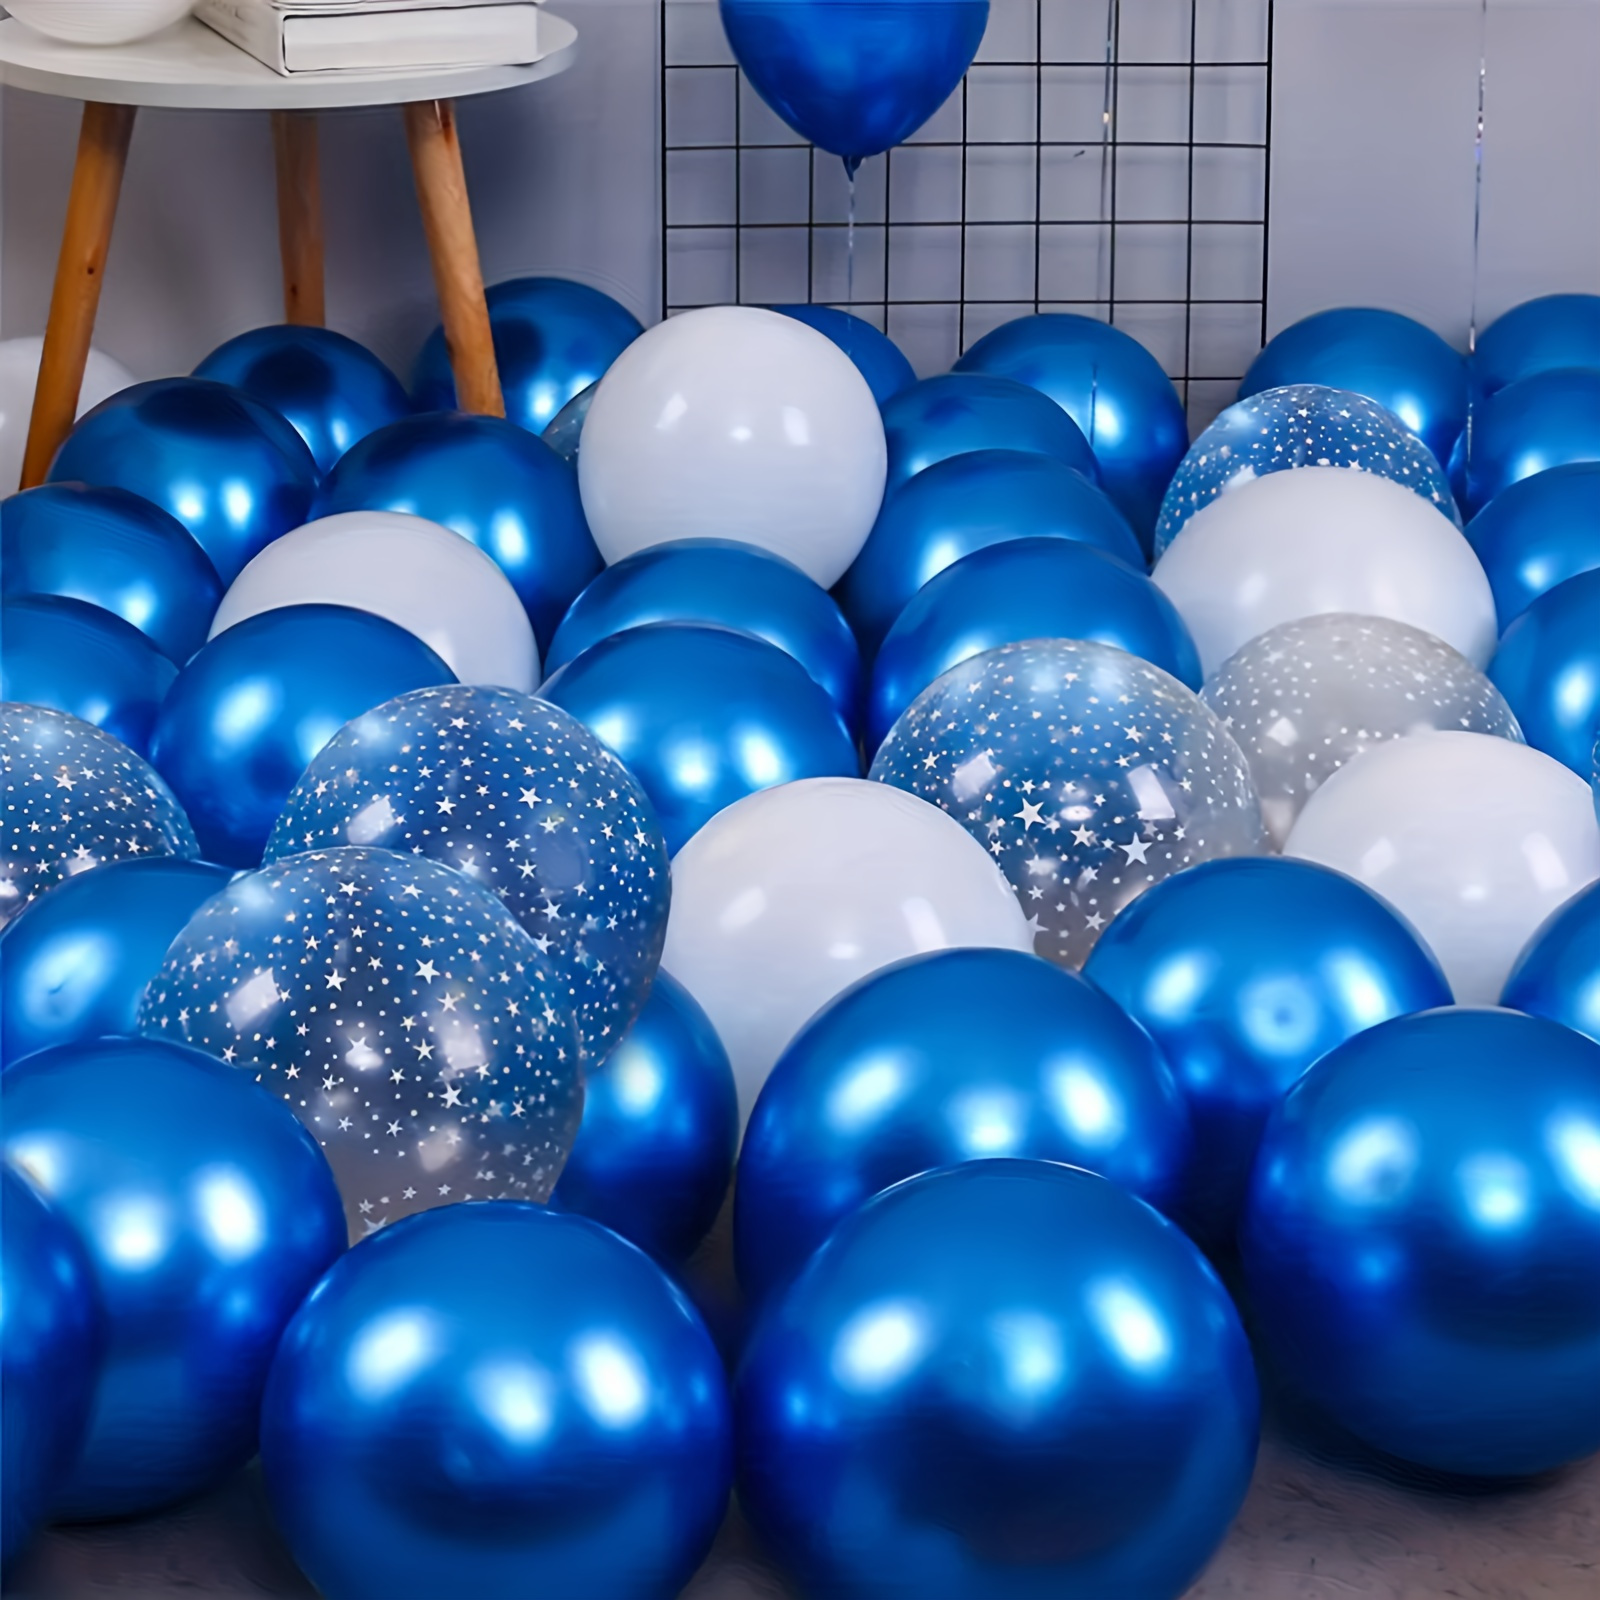 

50-piece Metallic Blue & White Star Balloon Set - Perfect For Birthdays, Weddings, Youngsters Showers & More - Durable Latex, No Power Needed, Ages 14+